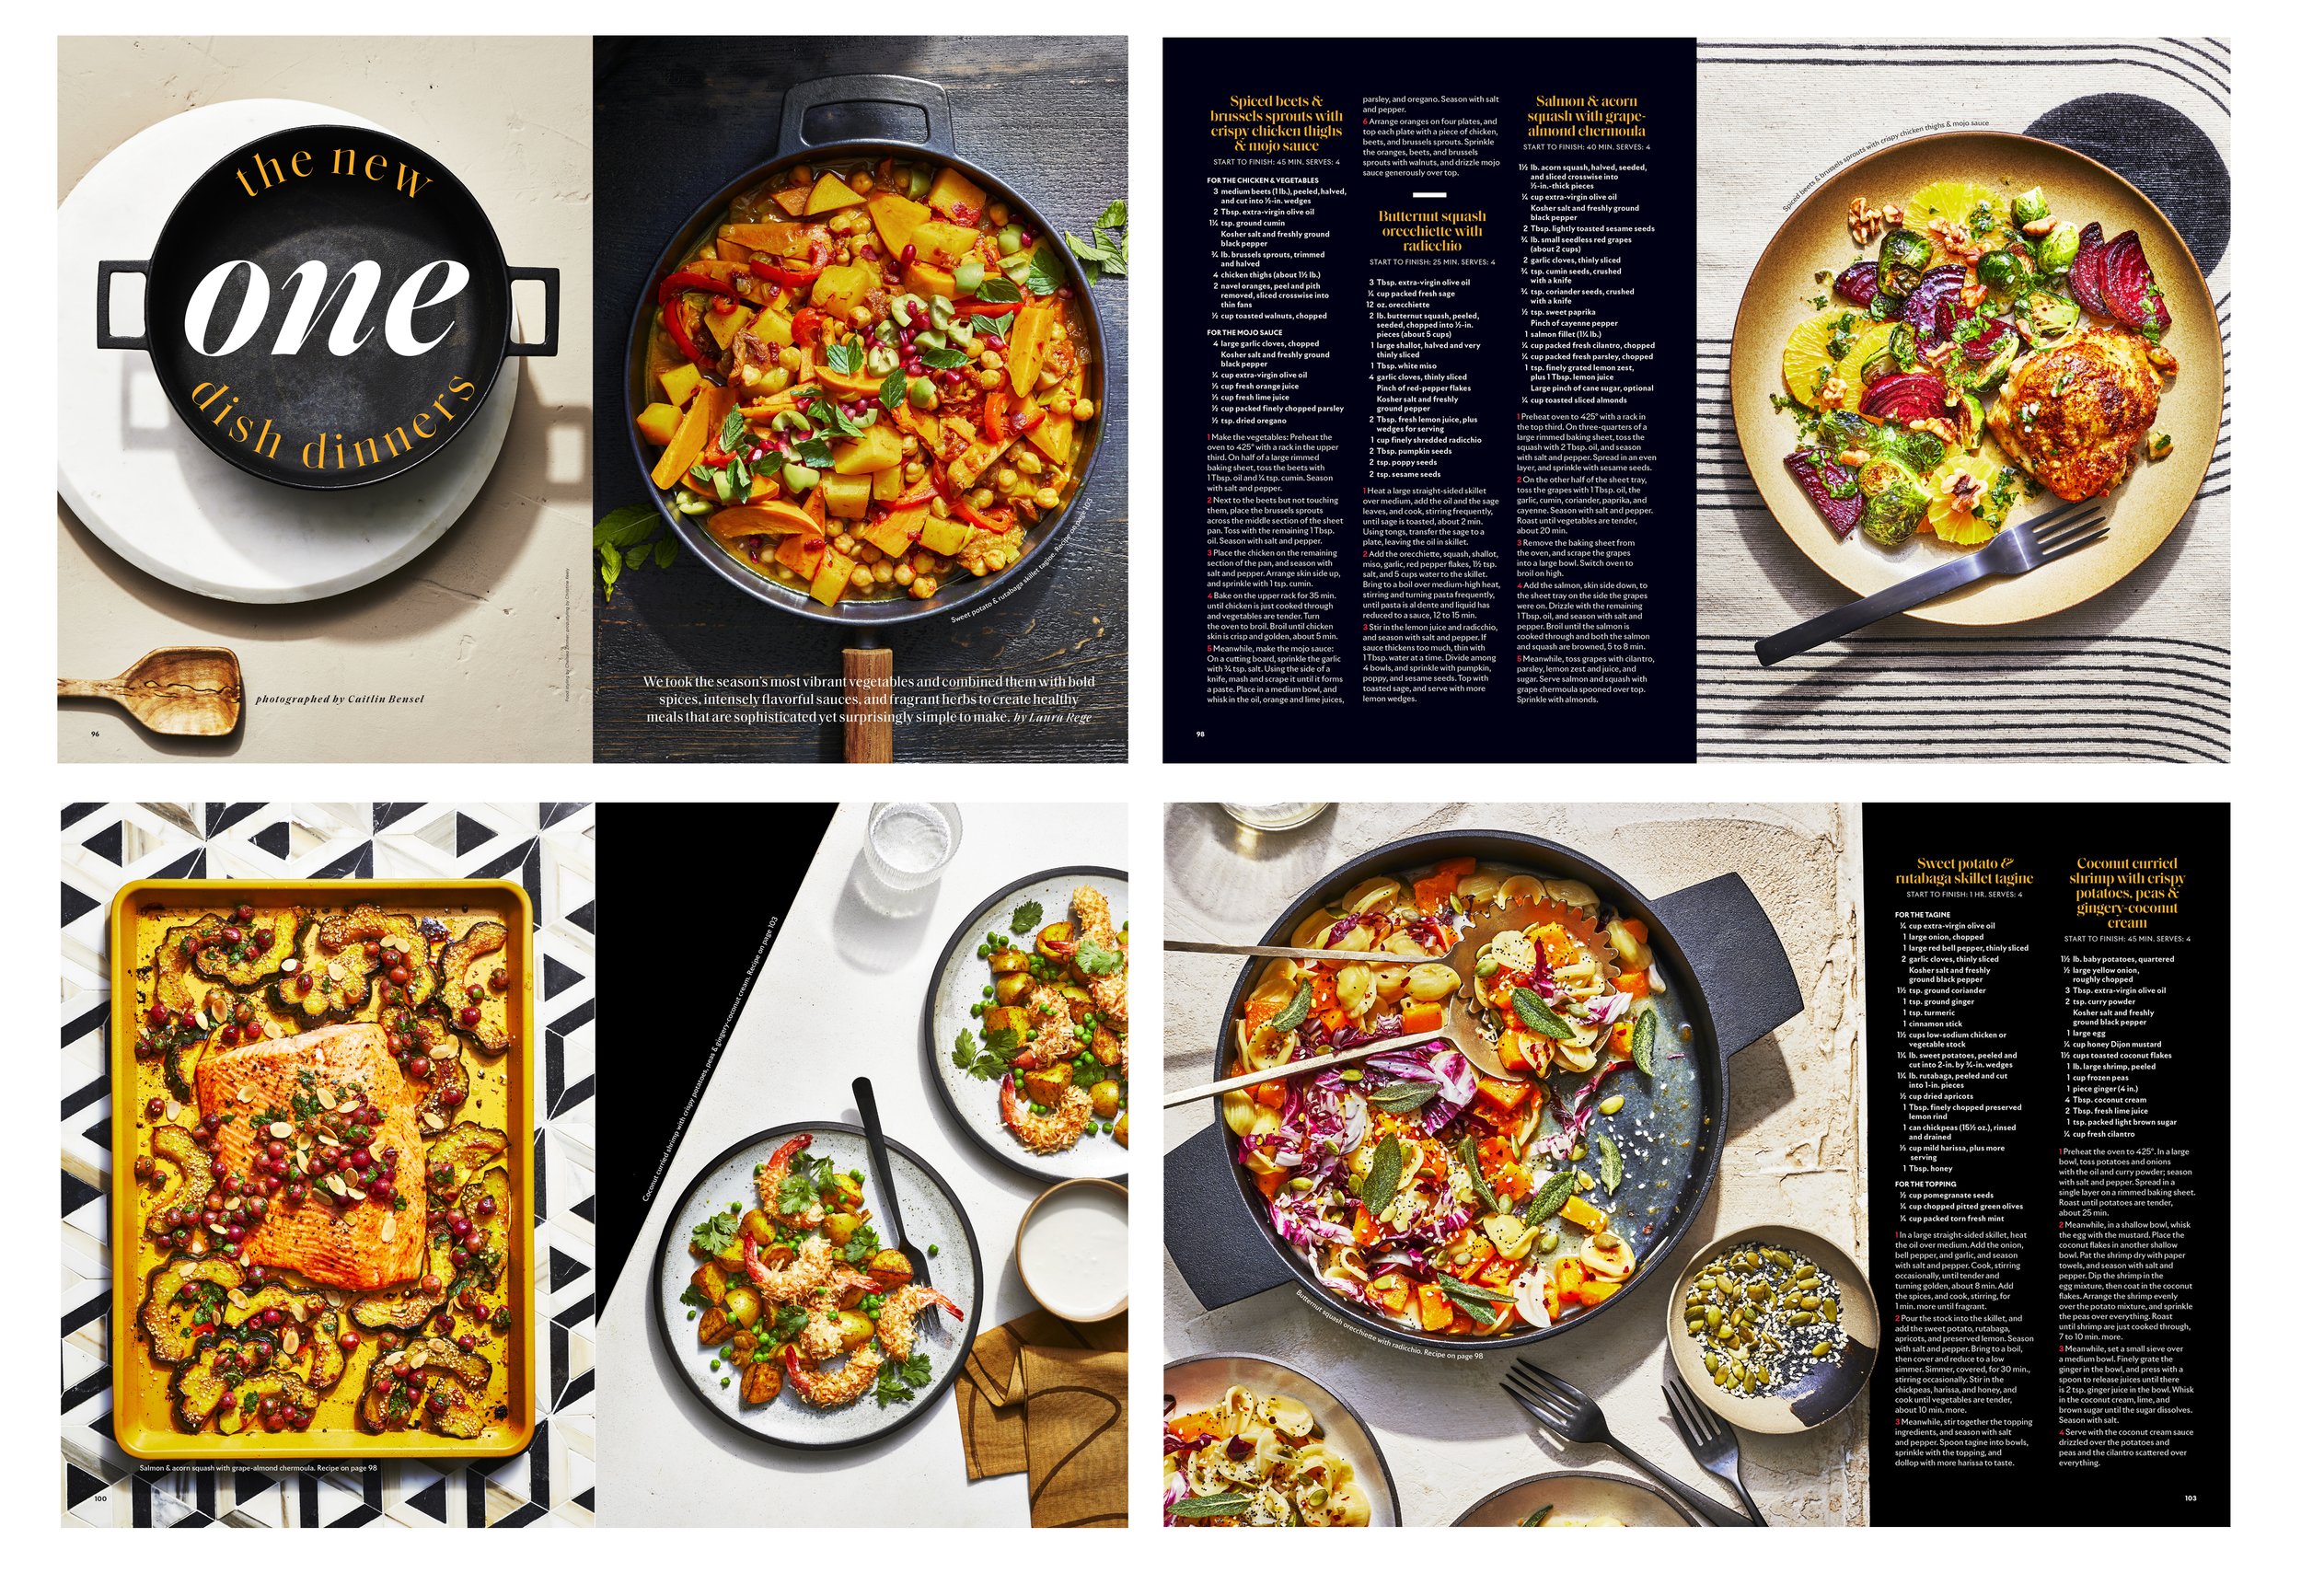 Final Photos and Layout: Food Feature- The New One Dish Dinners